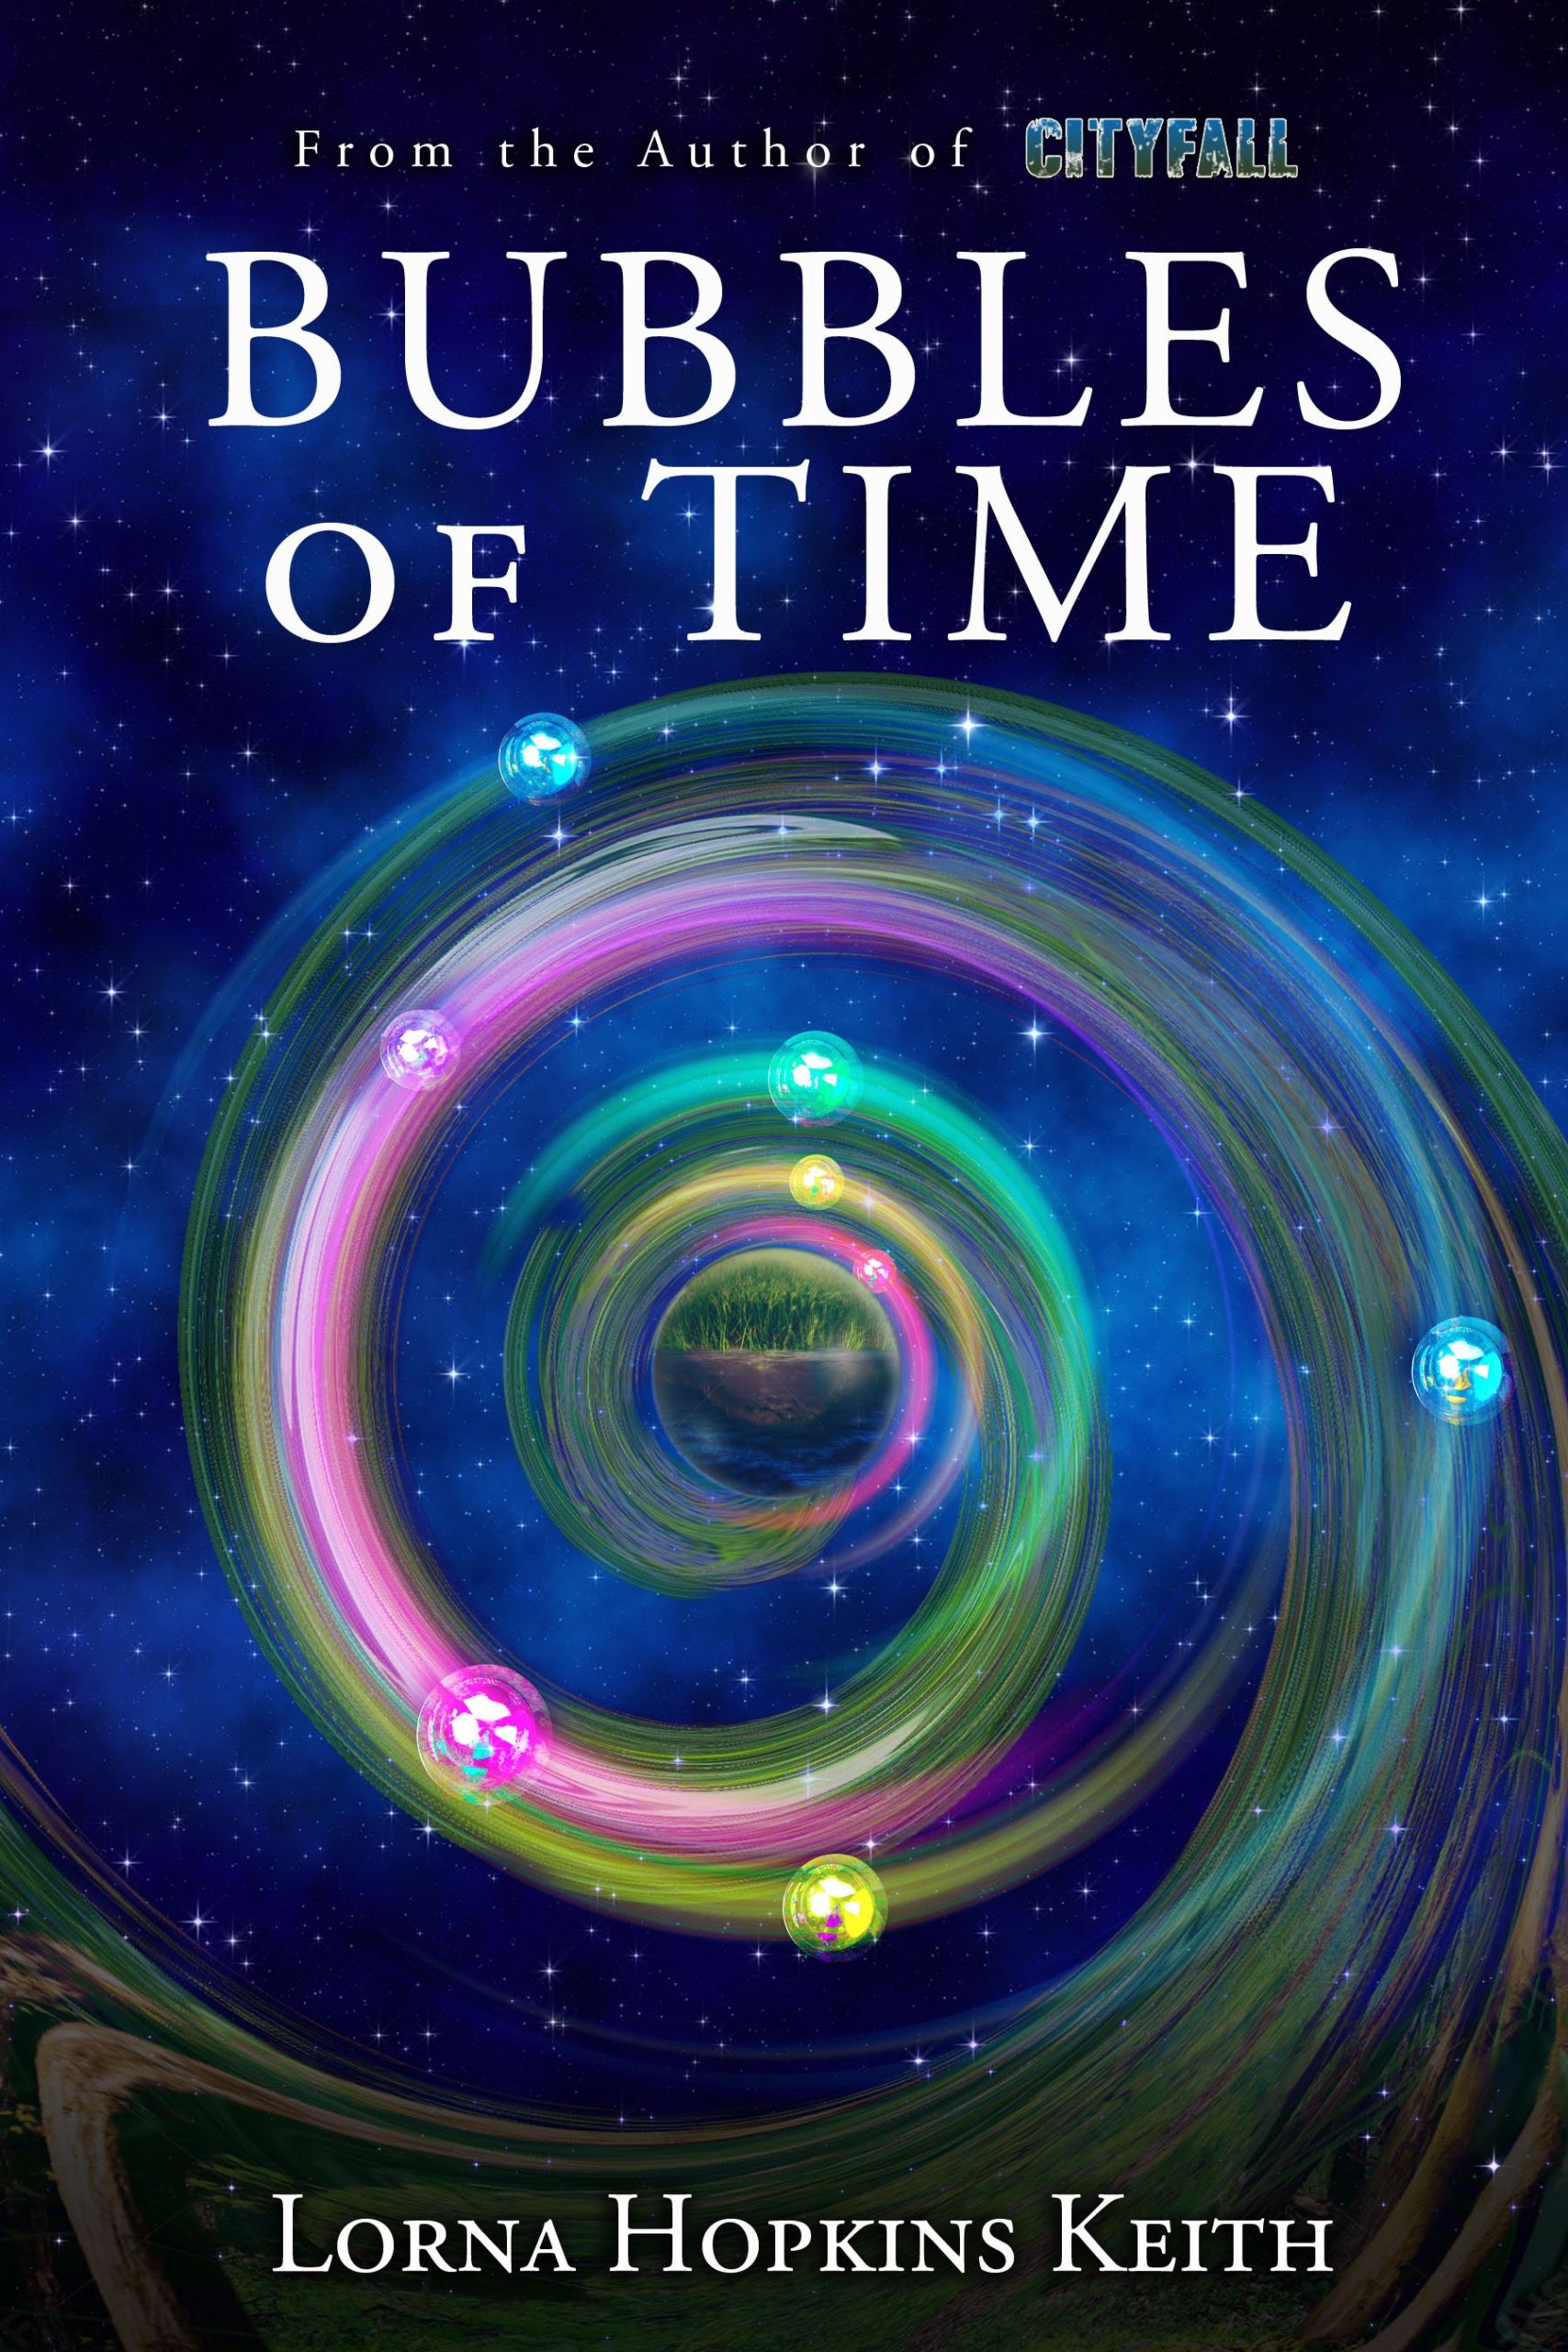 Bubbles of Time